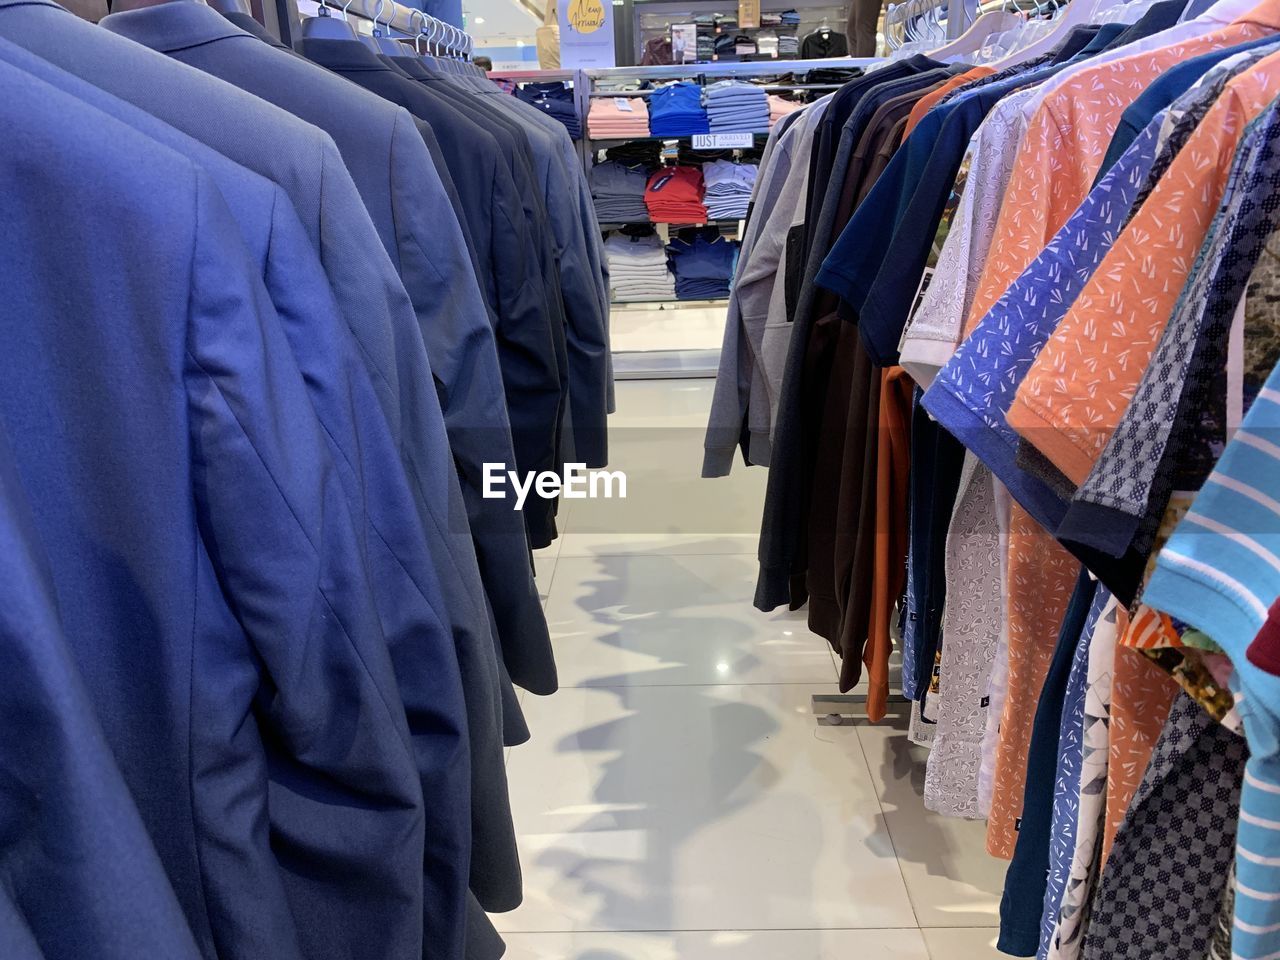 PANORAMIC VIEW OF CLOTHES HANGING AT RACK